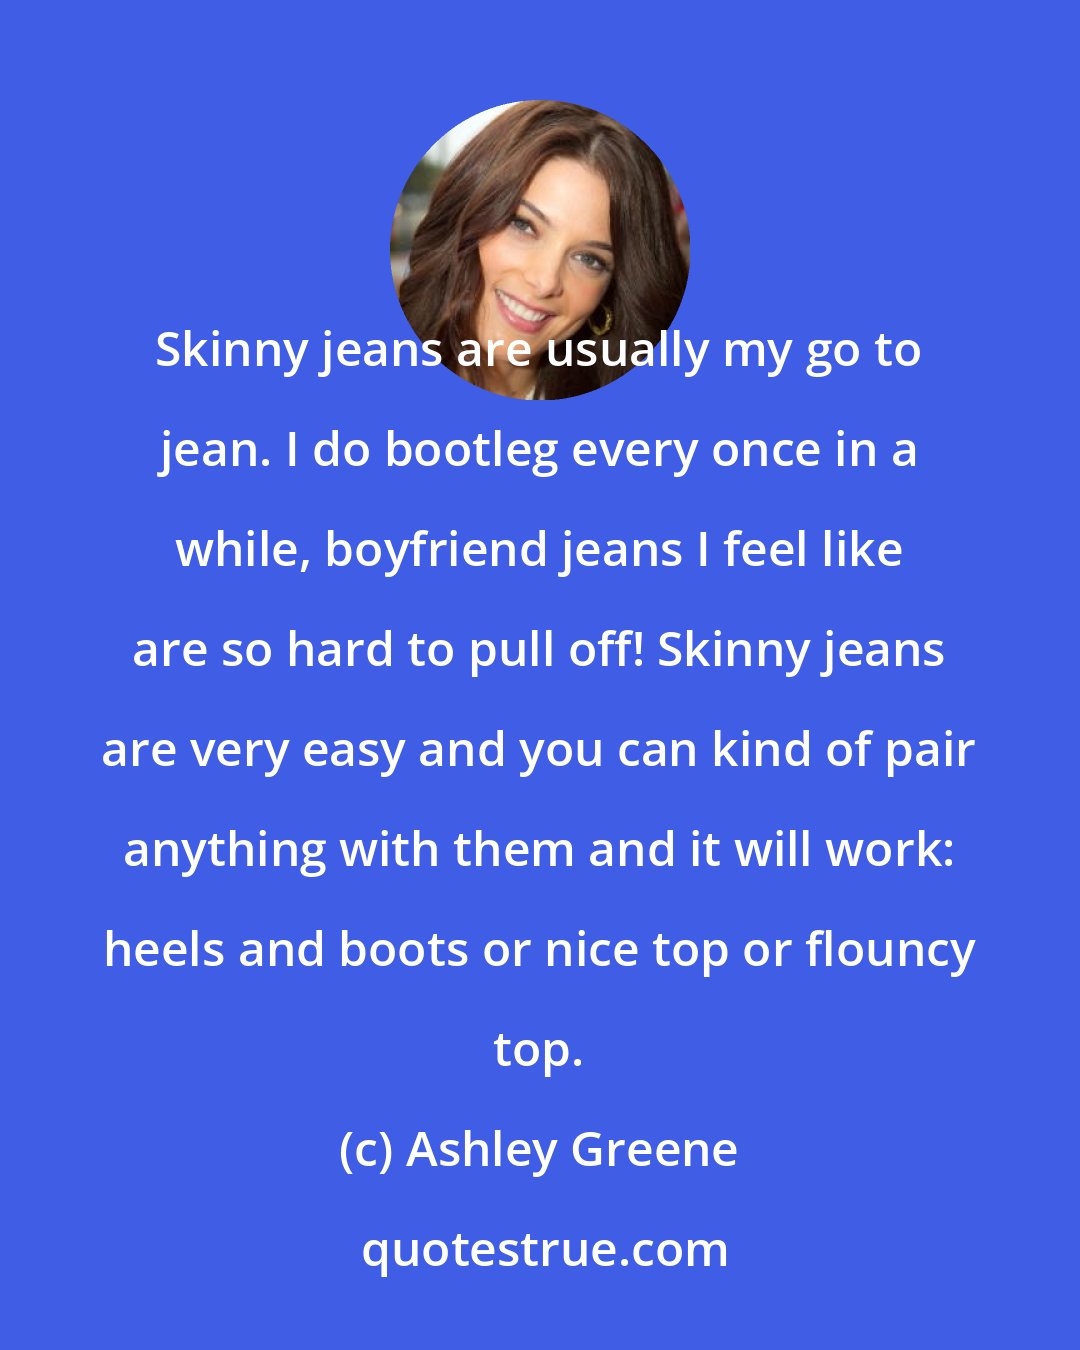 Ashley Greene: Skinny jeans are usually my go to jean. I do bootleg every once in a while, boyfriend jeans I feel like are so hard to pull off! Skinny jeans are very easy and you can kind of pair anything with them and it will work: heels and boots or nice top or flouncy top.